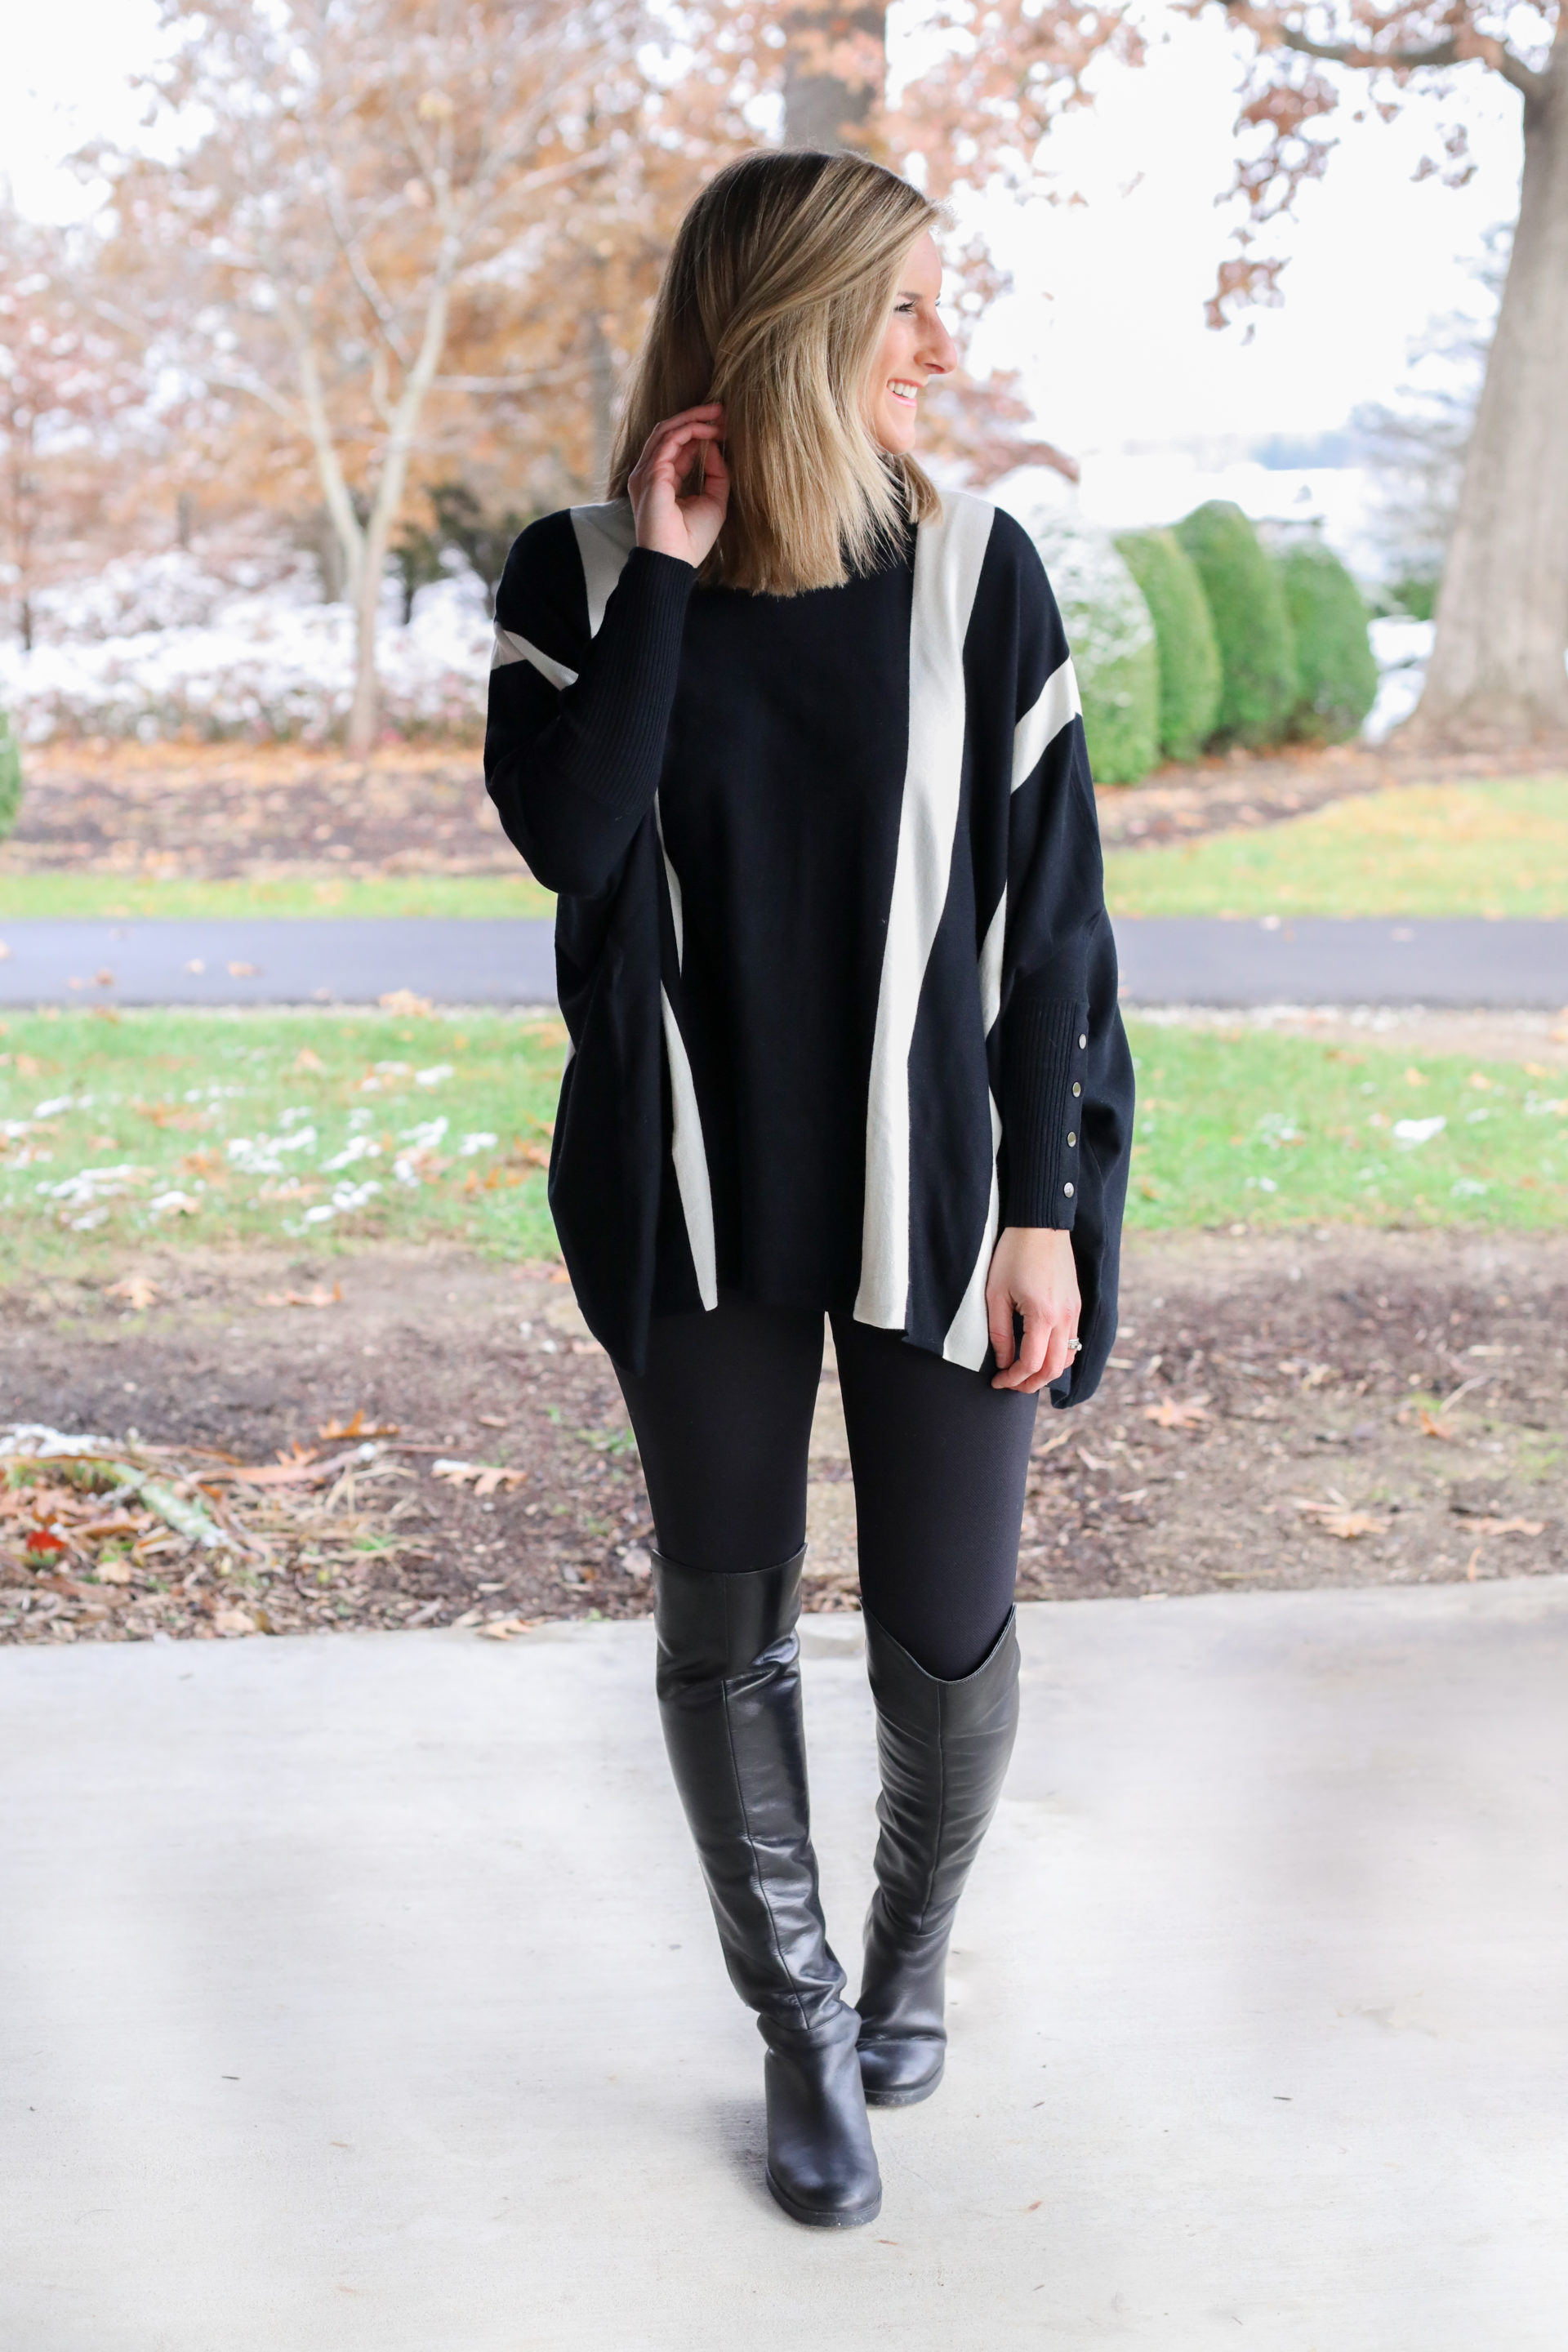 19 Best Tunic tops with leggings ideas